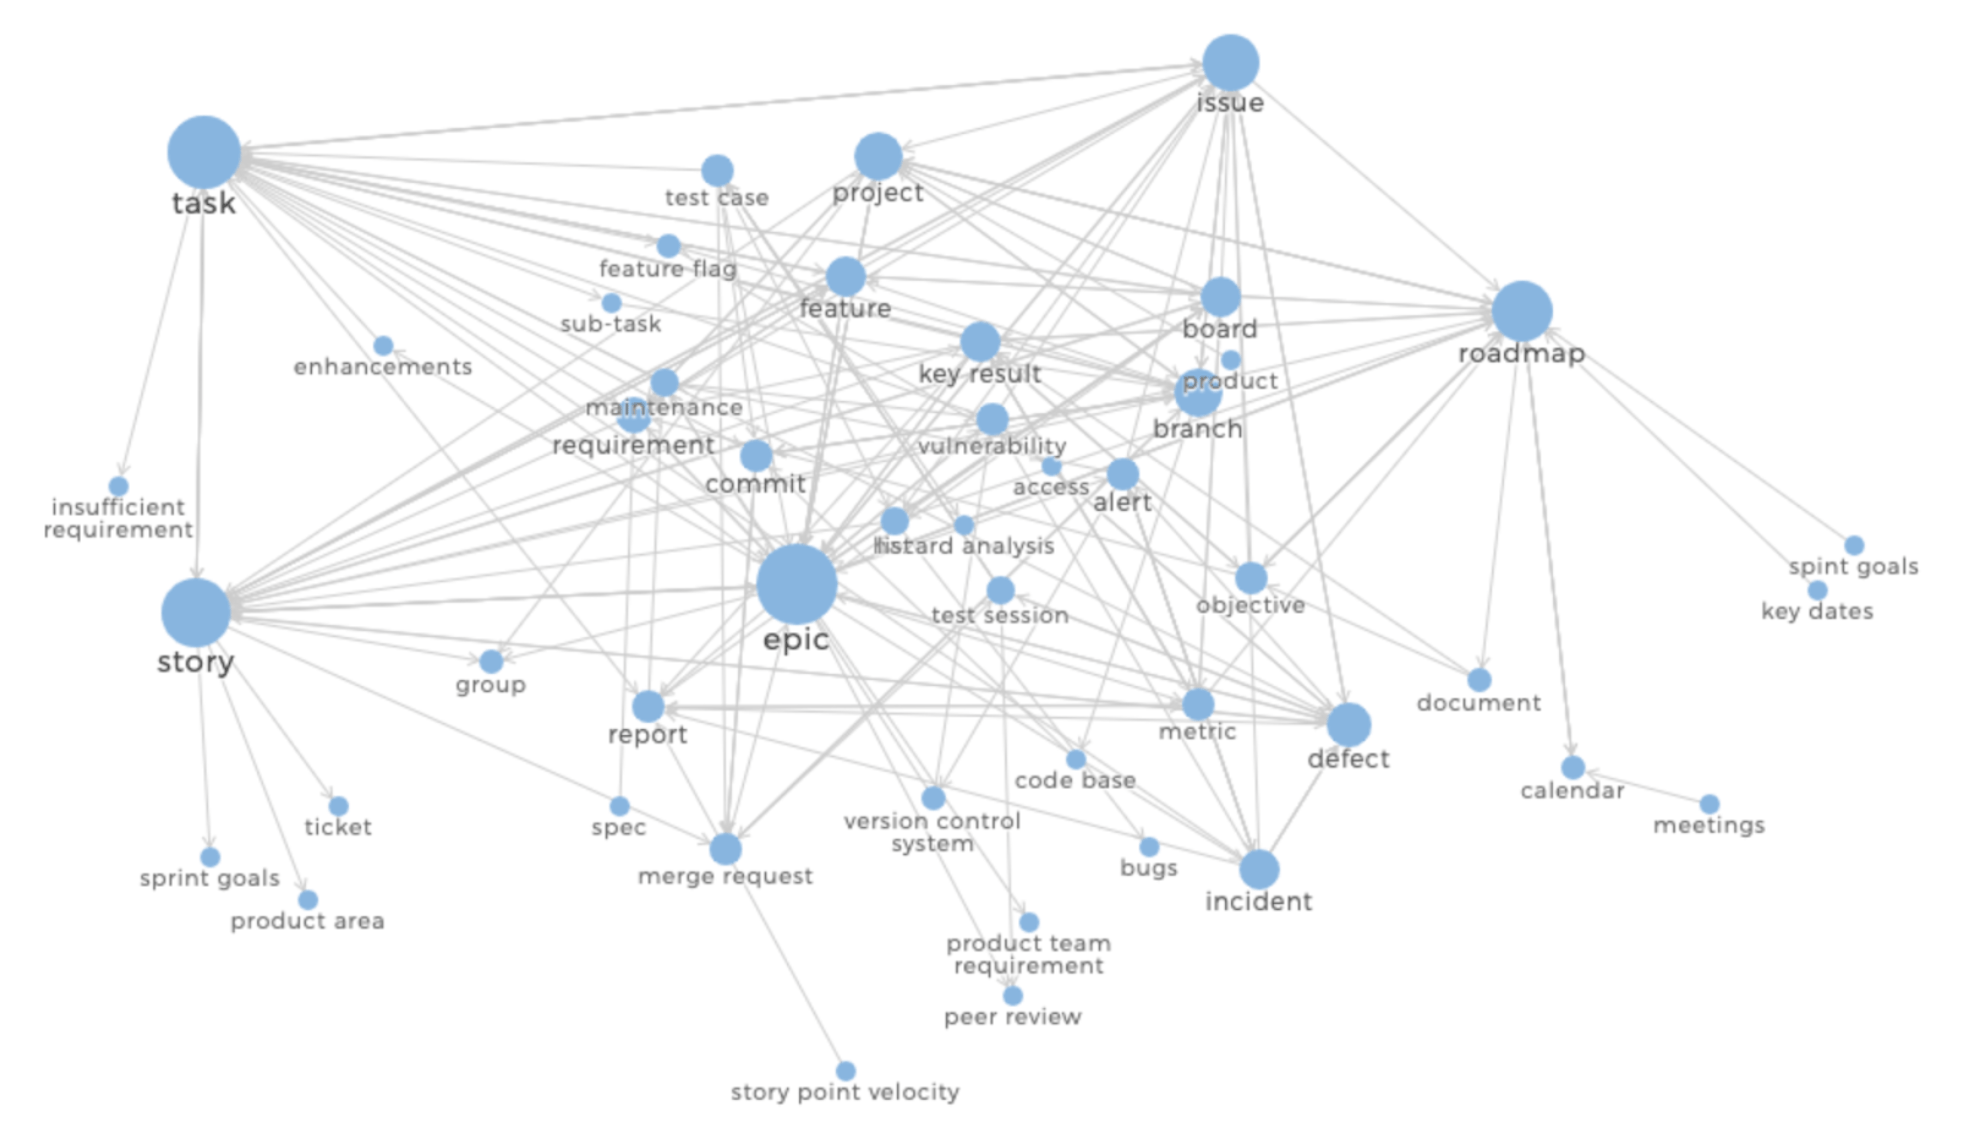 Network graph of mental modeling terms